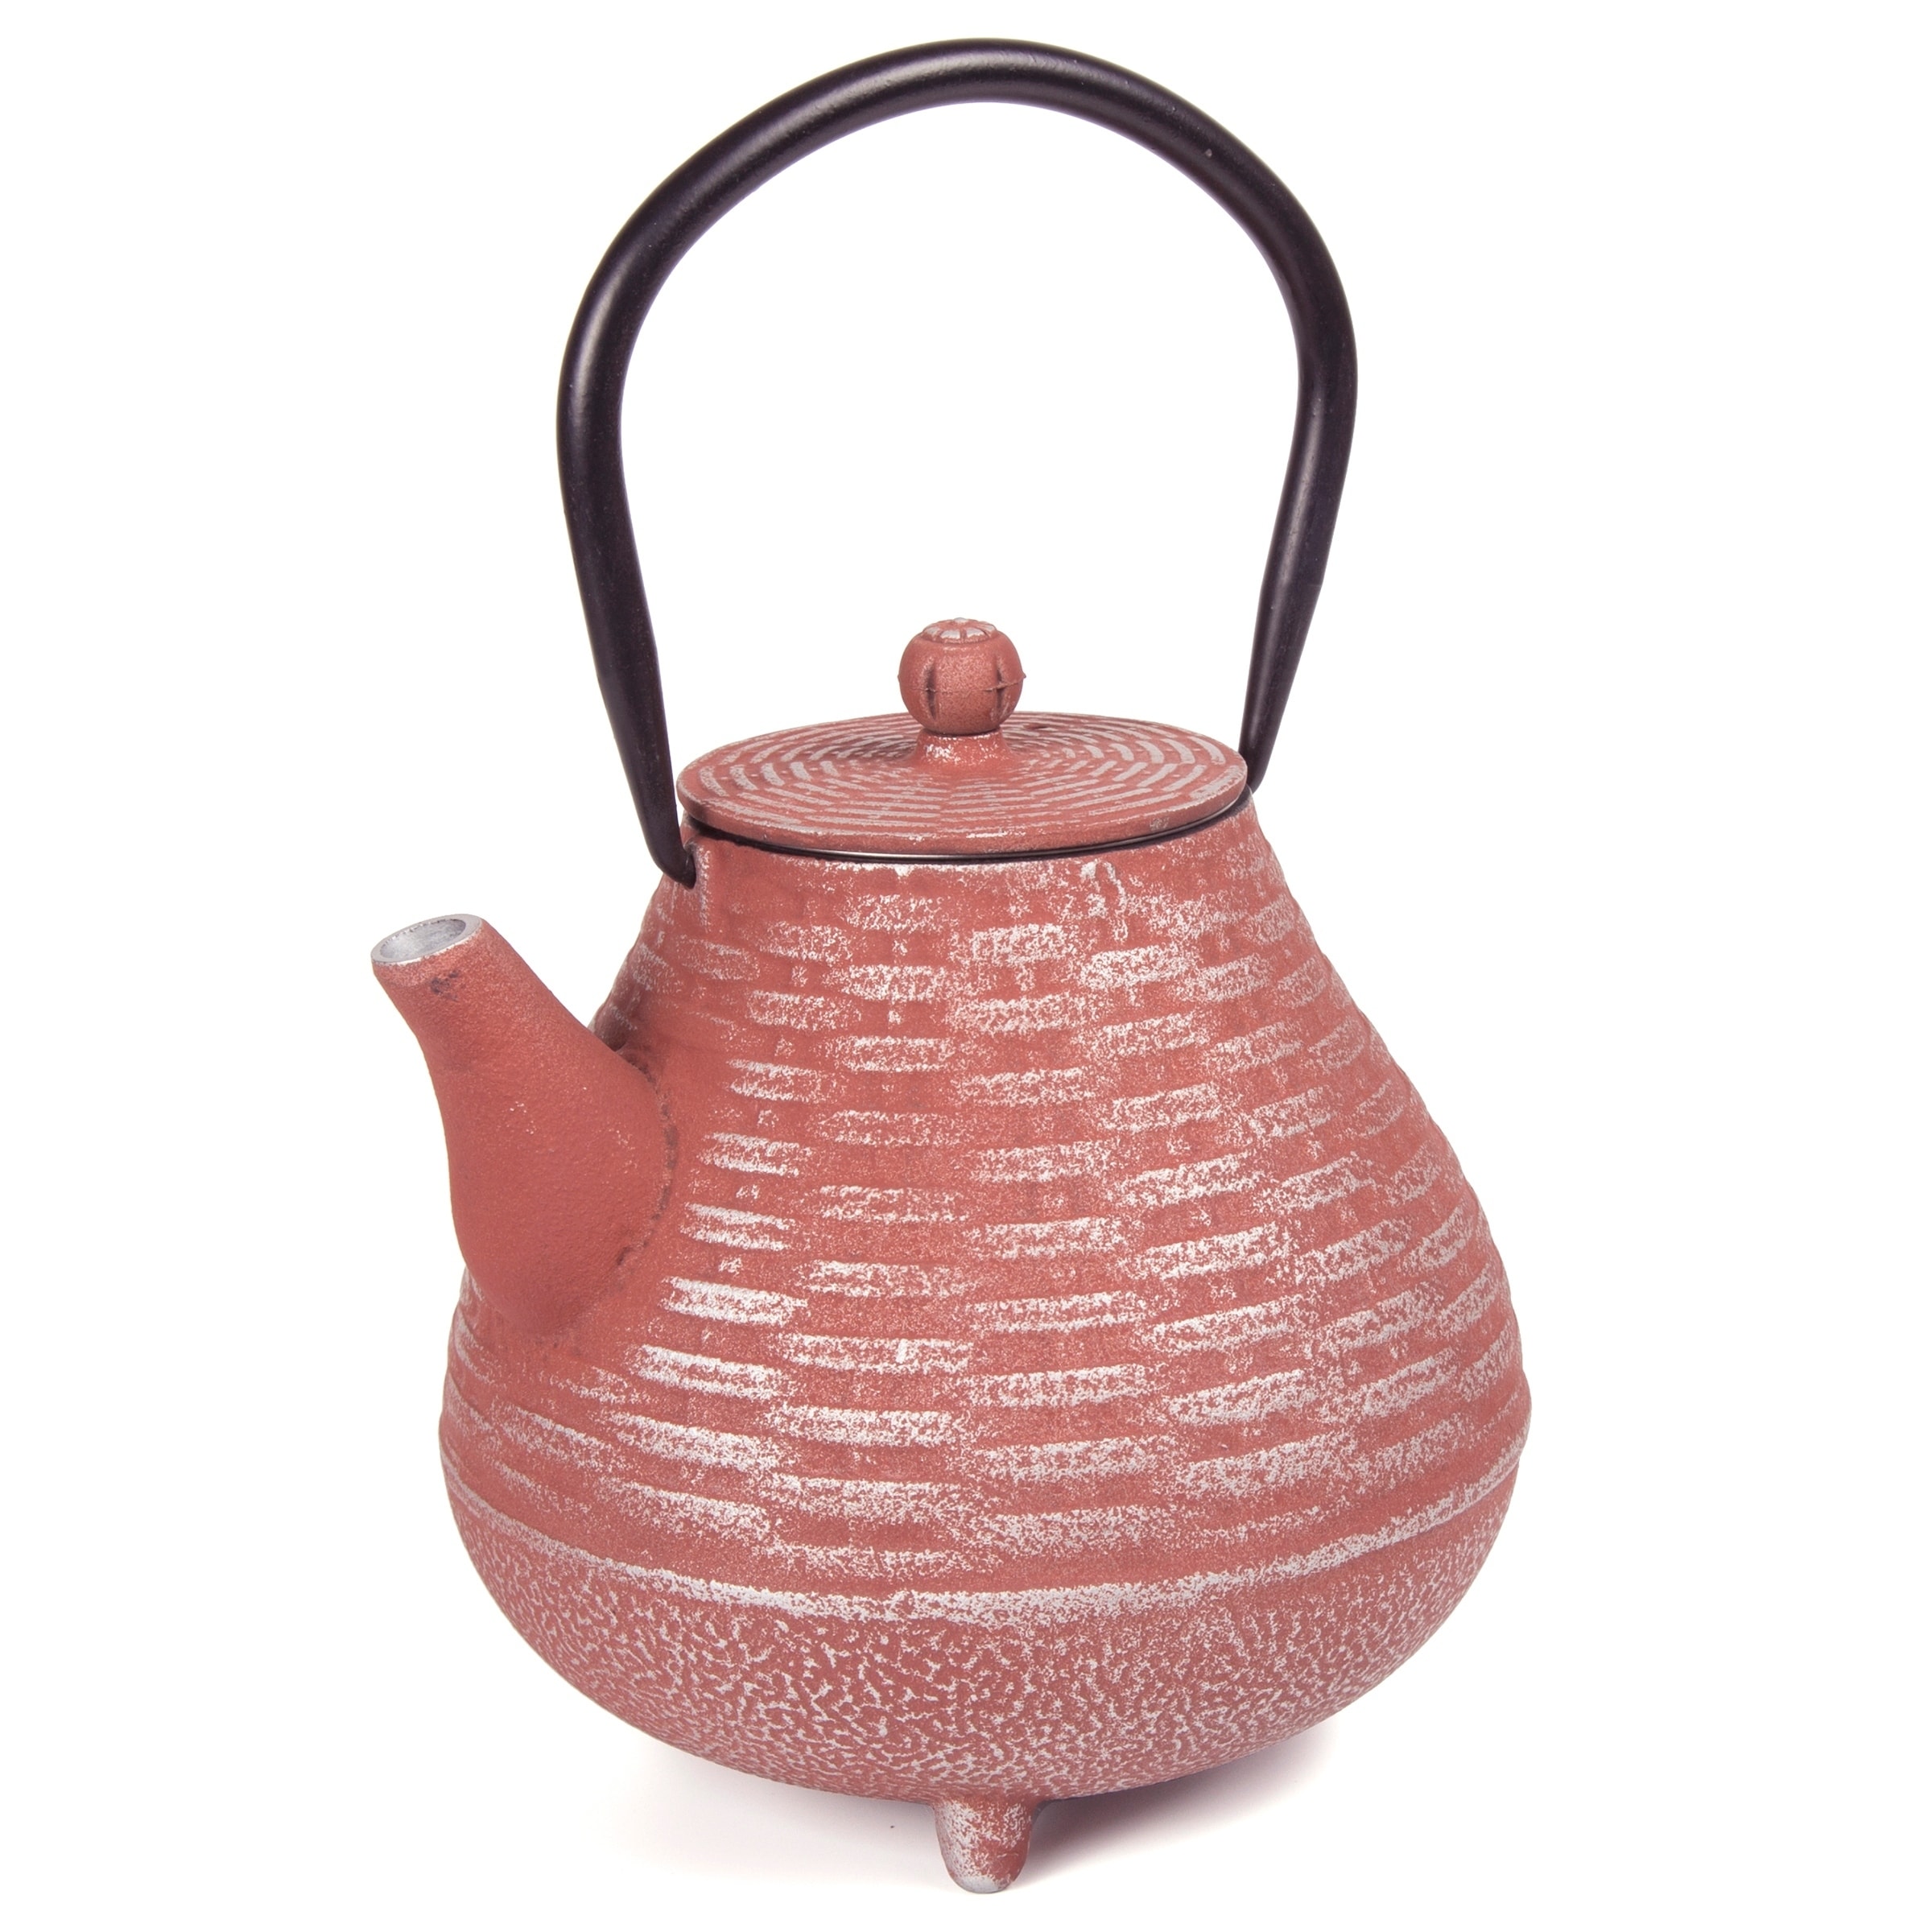 https://ak1.ostkcdn.com/images/products/30946147/Creative-Home-40-oz-Silver-Orange-Cast-Iron-Tea-Pot-with-Stainless-Steel-Infuser-Basket-0fb6c530-be11-42c7-bd31-f452be3aac42.jpg